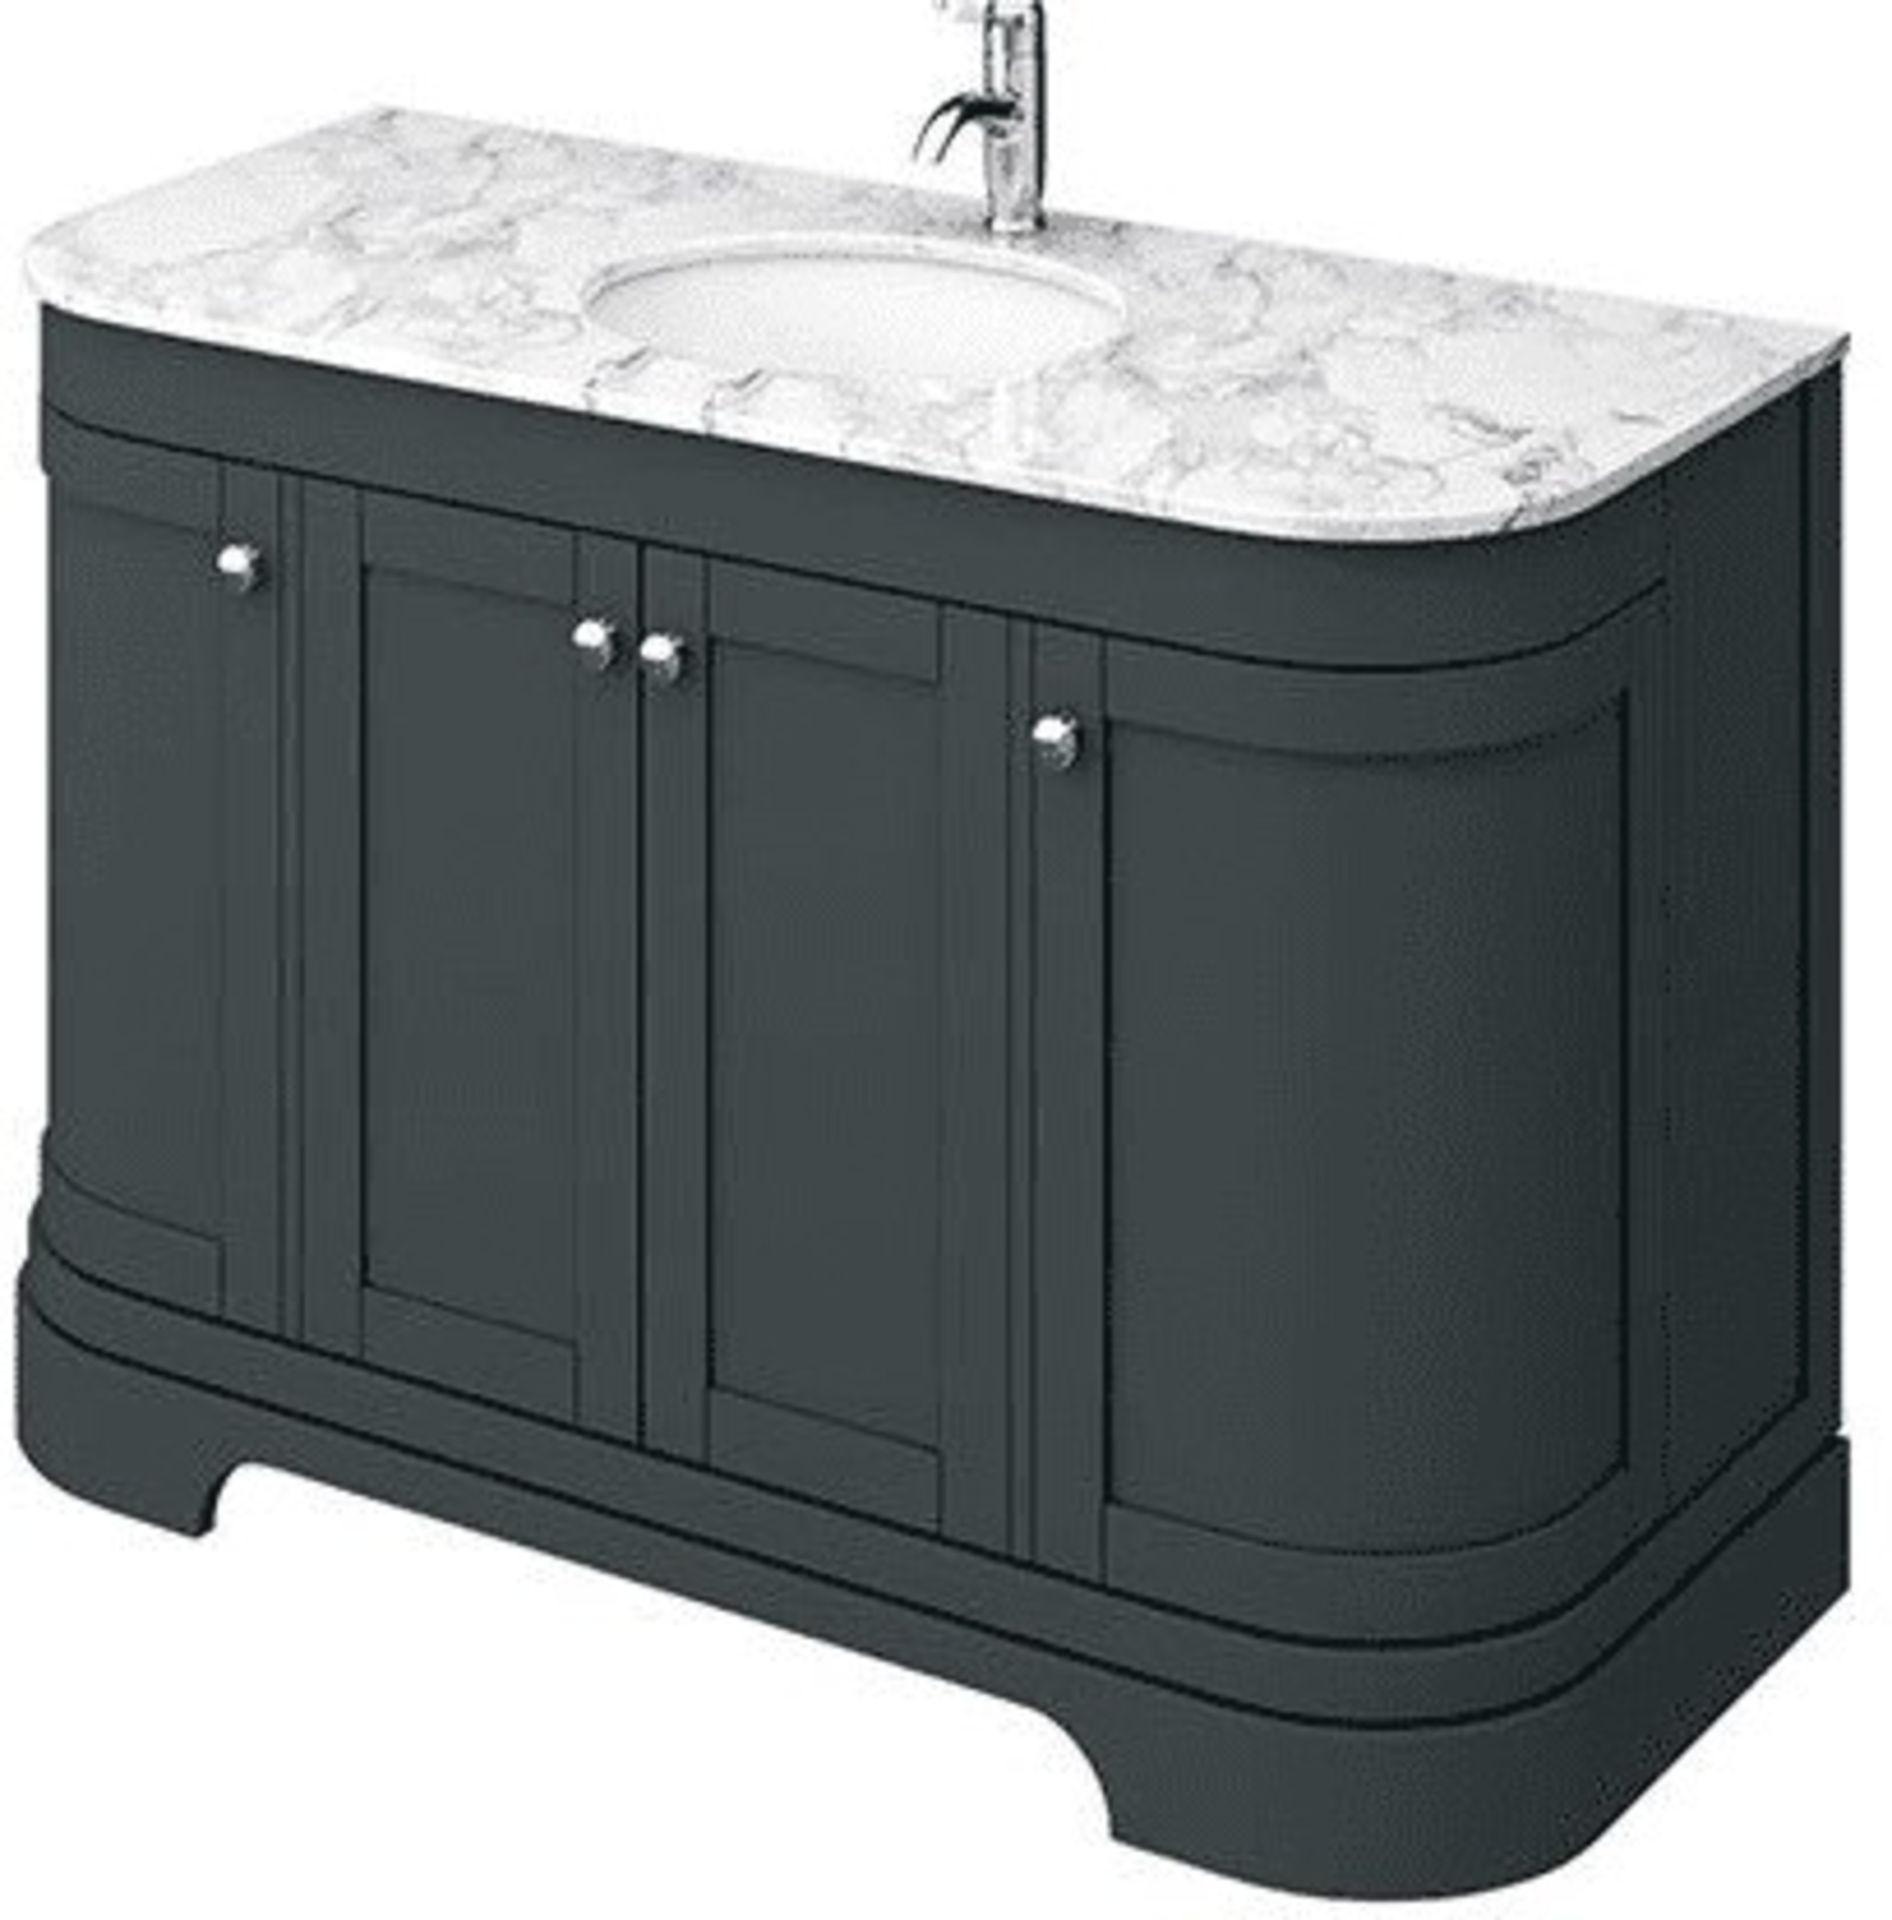 New & Boxed 1200 mm York Charcoal Marble Top Vanity Unit - 1200 mm. RRP £3,499.